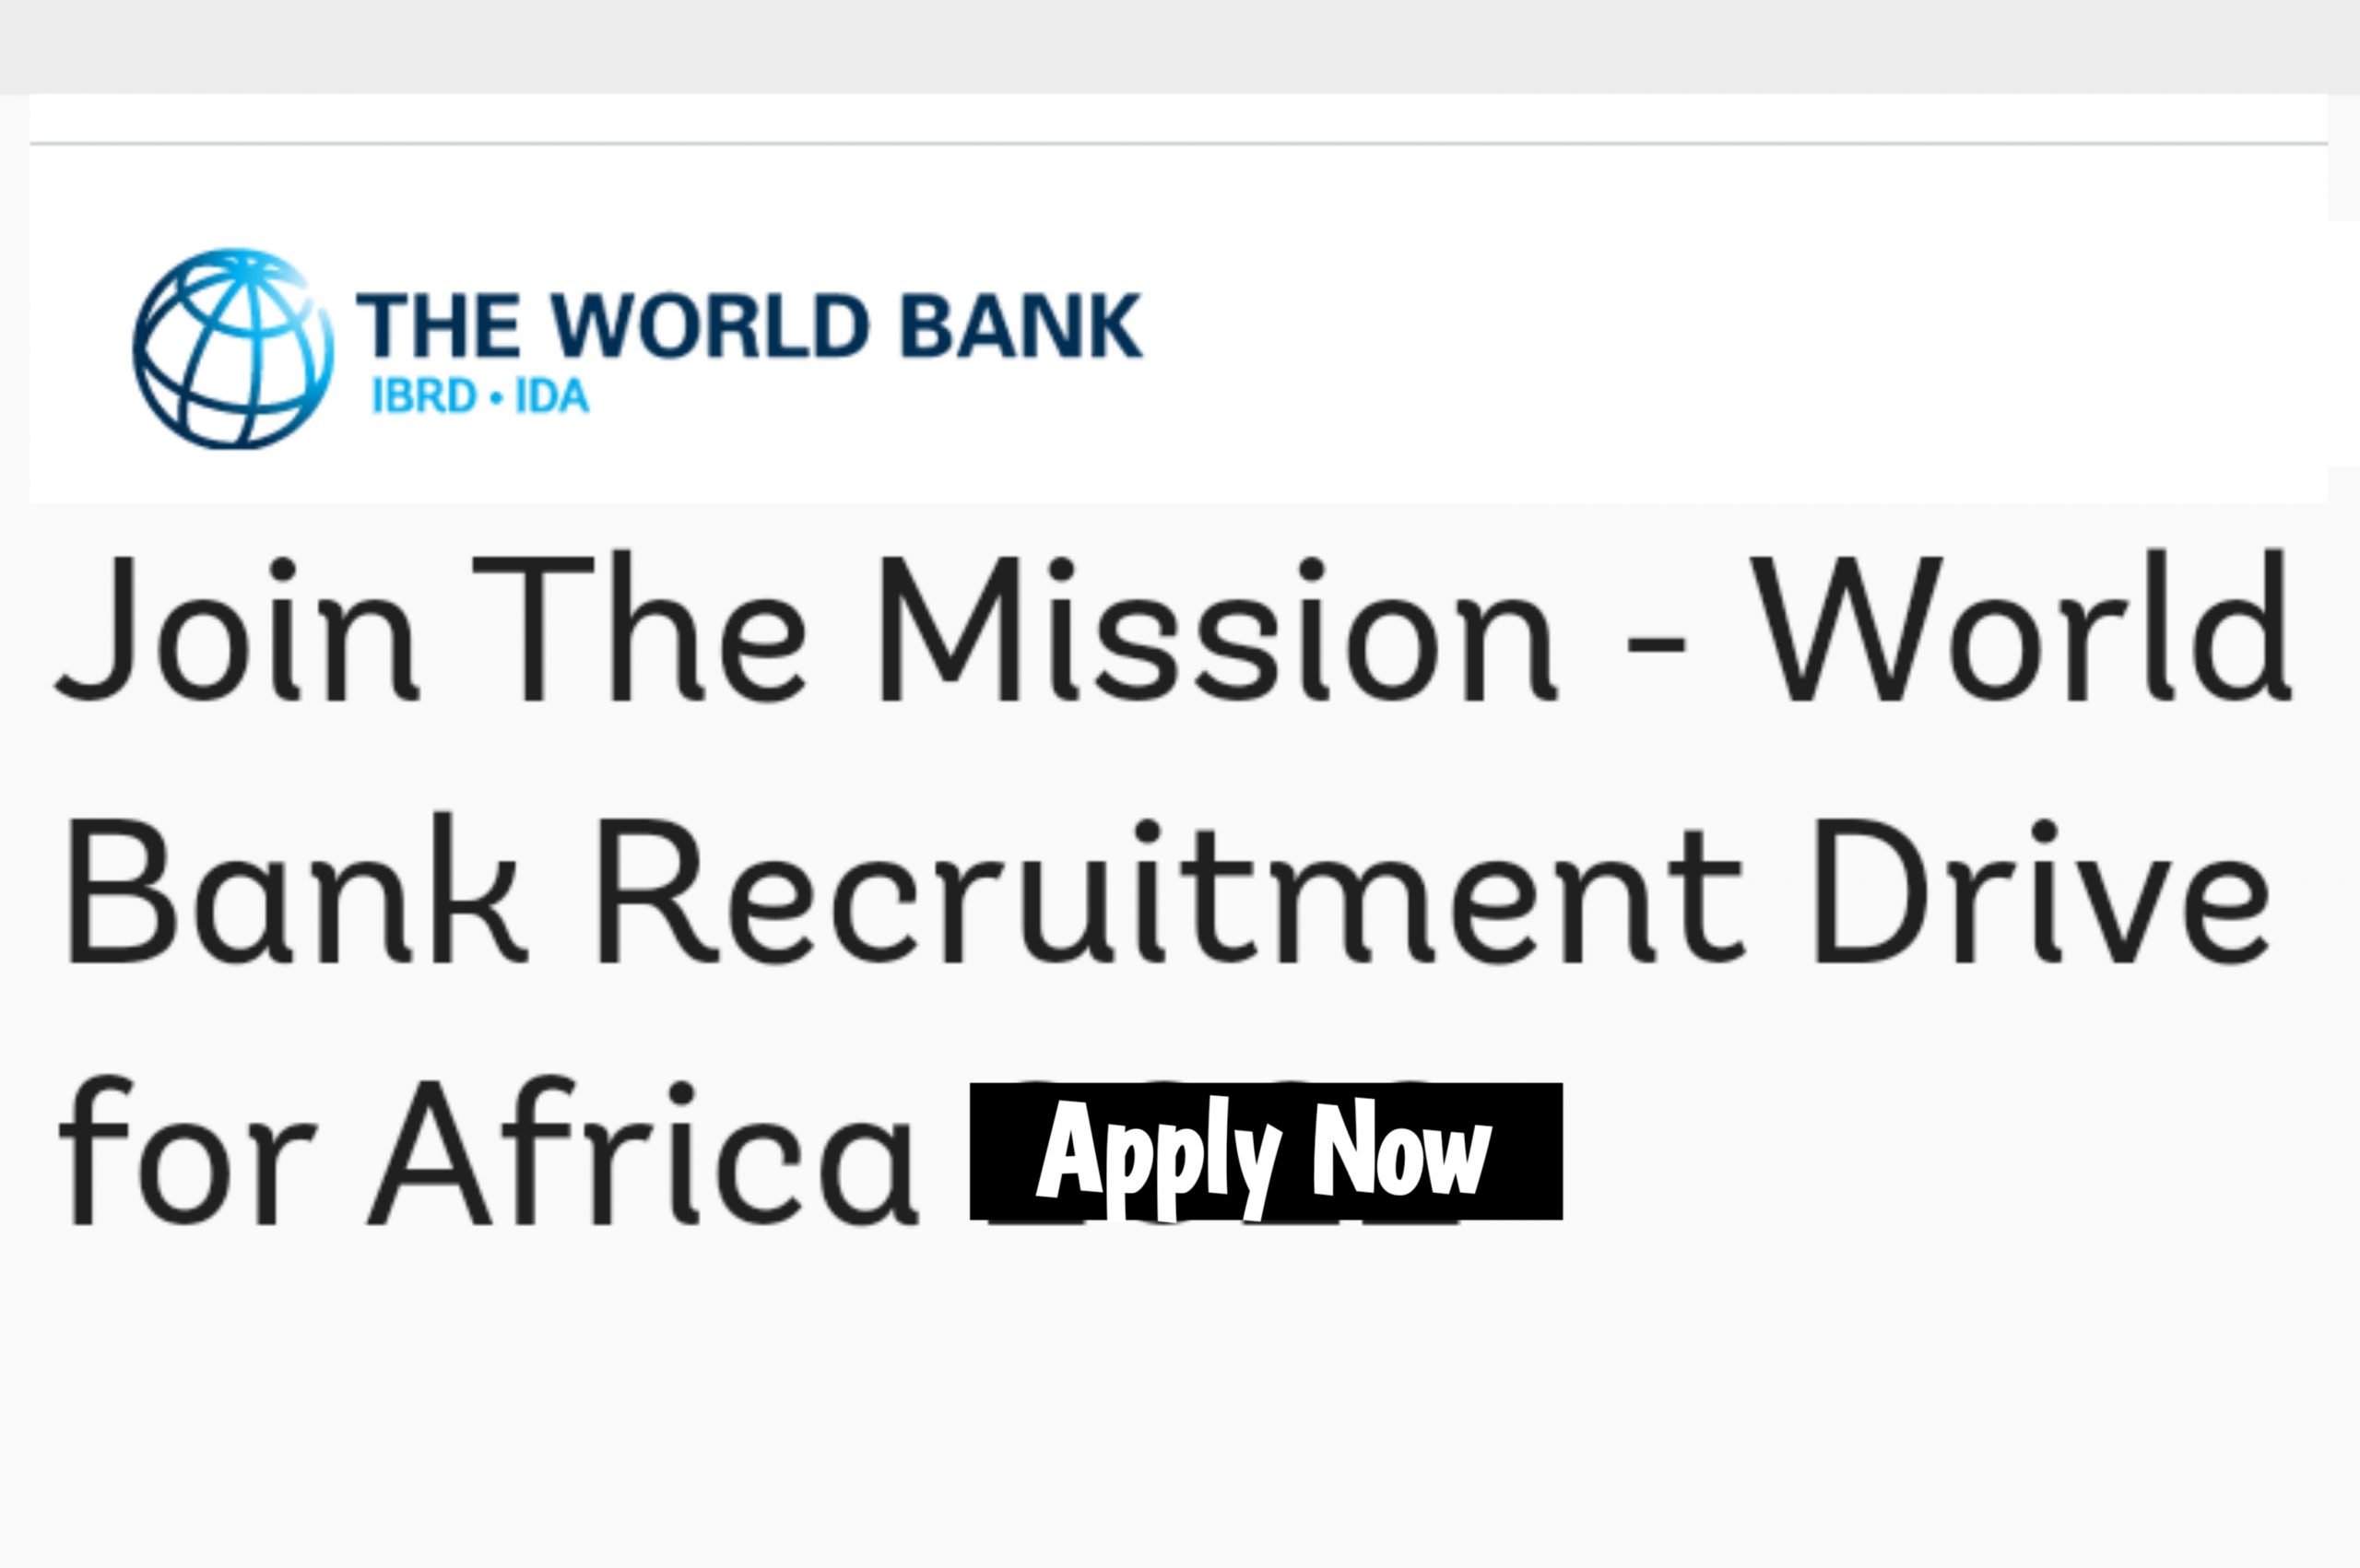 20221009 151532 scaled - Paid Job Opportunities; The World Bank Recruitment Drive for Africans 